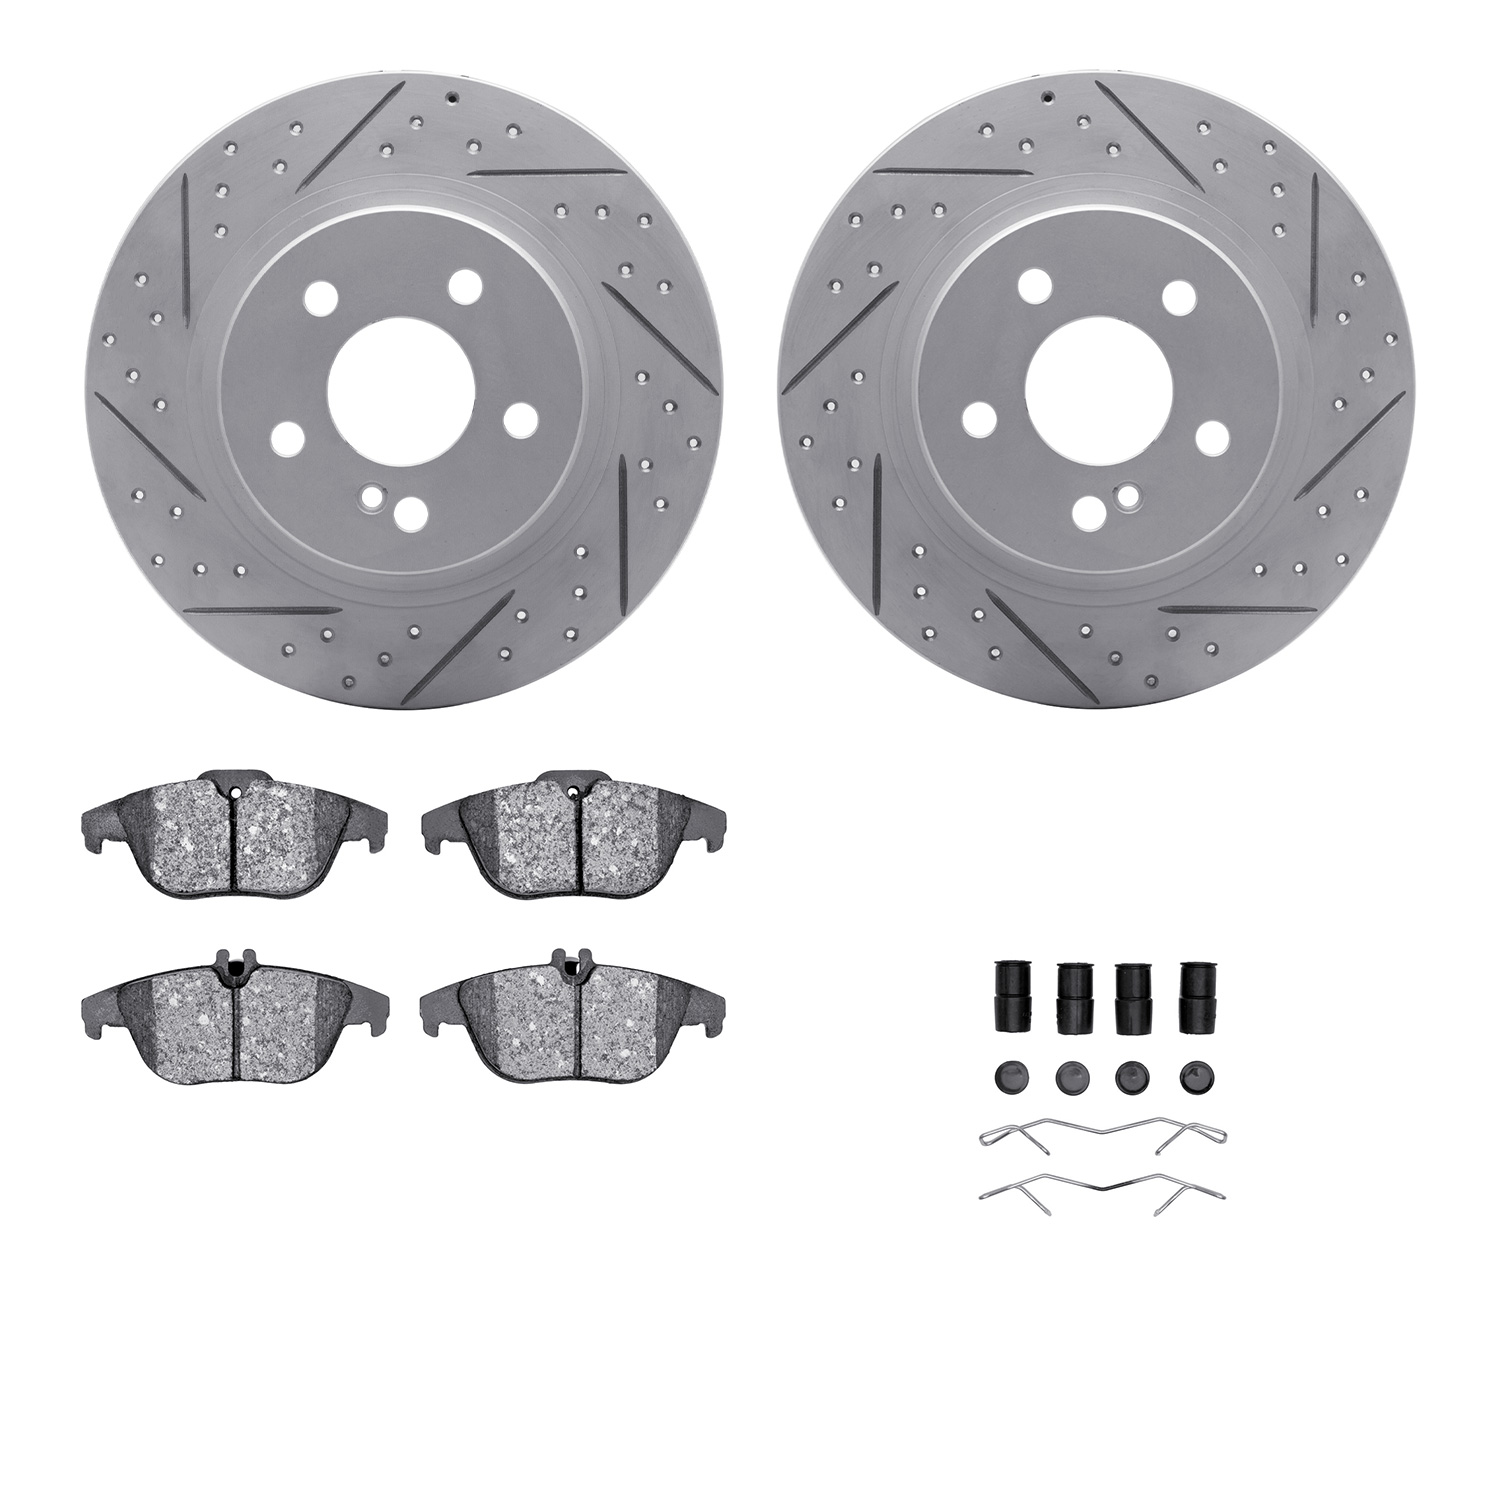 2512-63028 Geoperformance Drilled/Slotted Rotors w/5000 Advanced Brake Pads Kit & Hardware, 2010-2015 Mercedes-Benz, Position: R